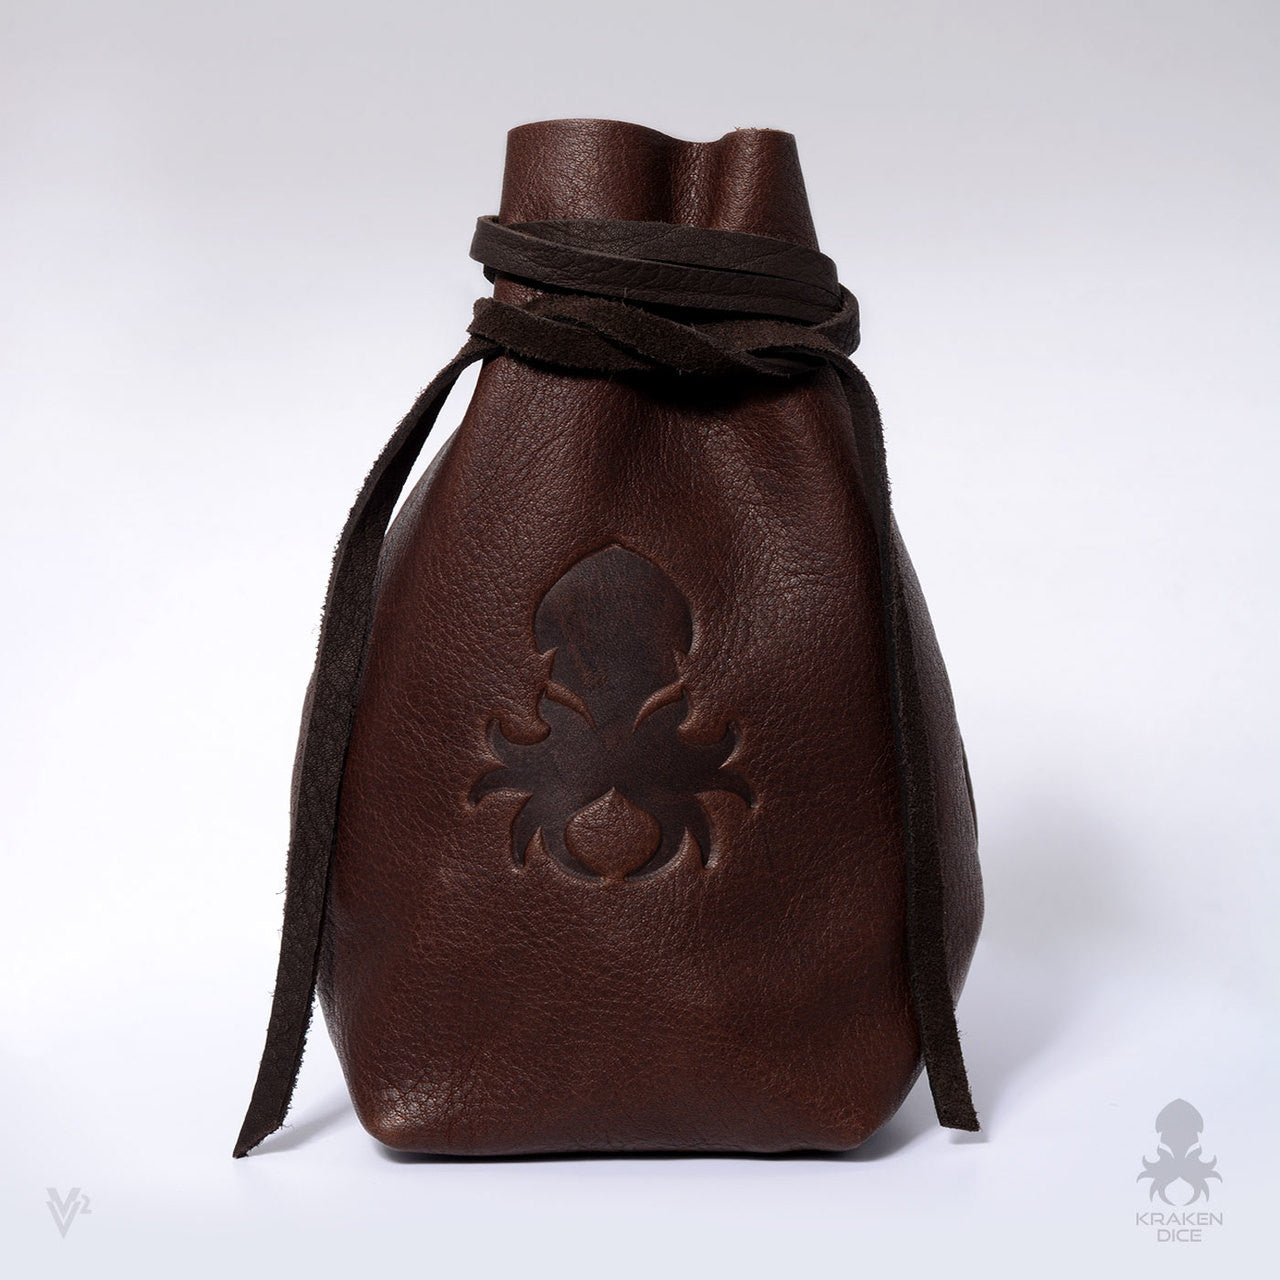 Freestanding Large Dice Bag In Brown Leather